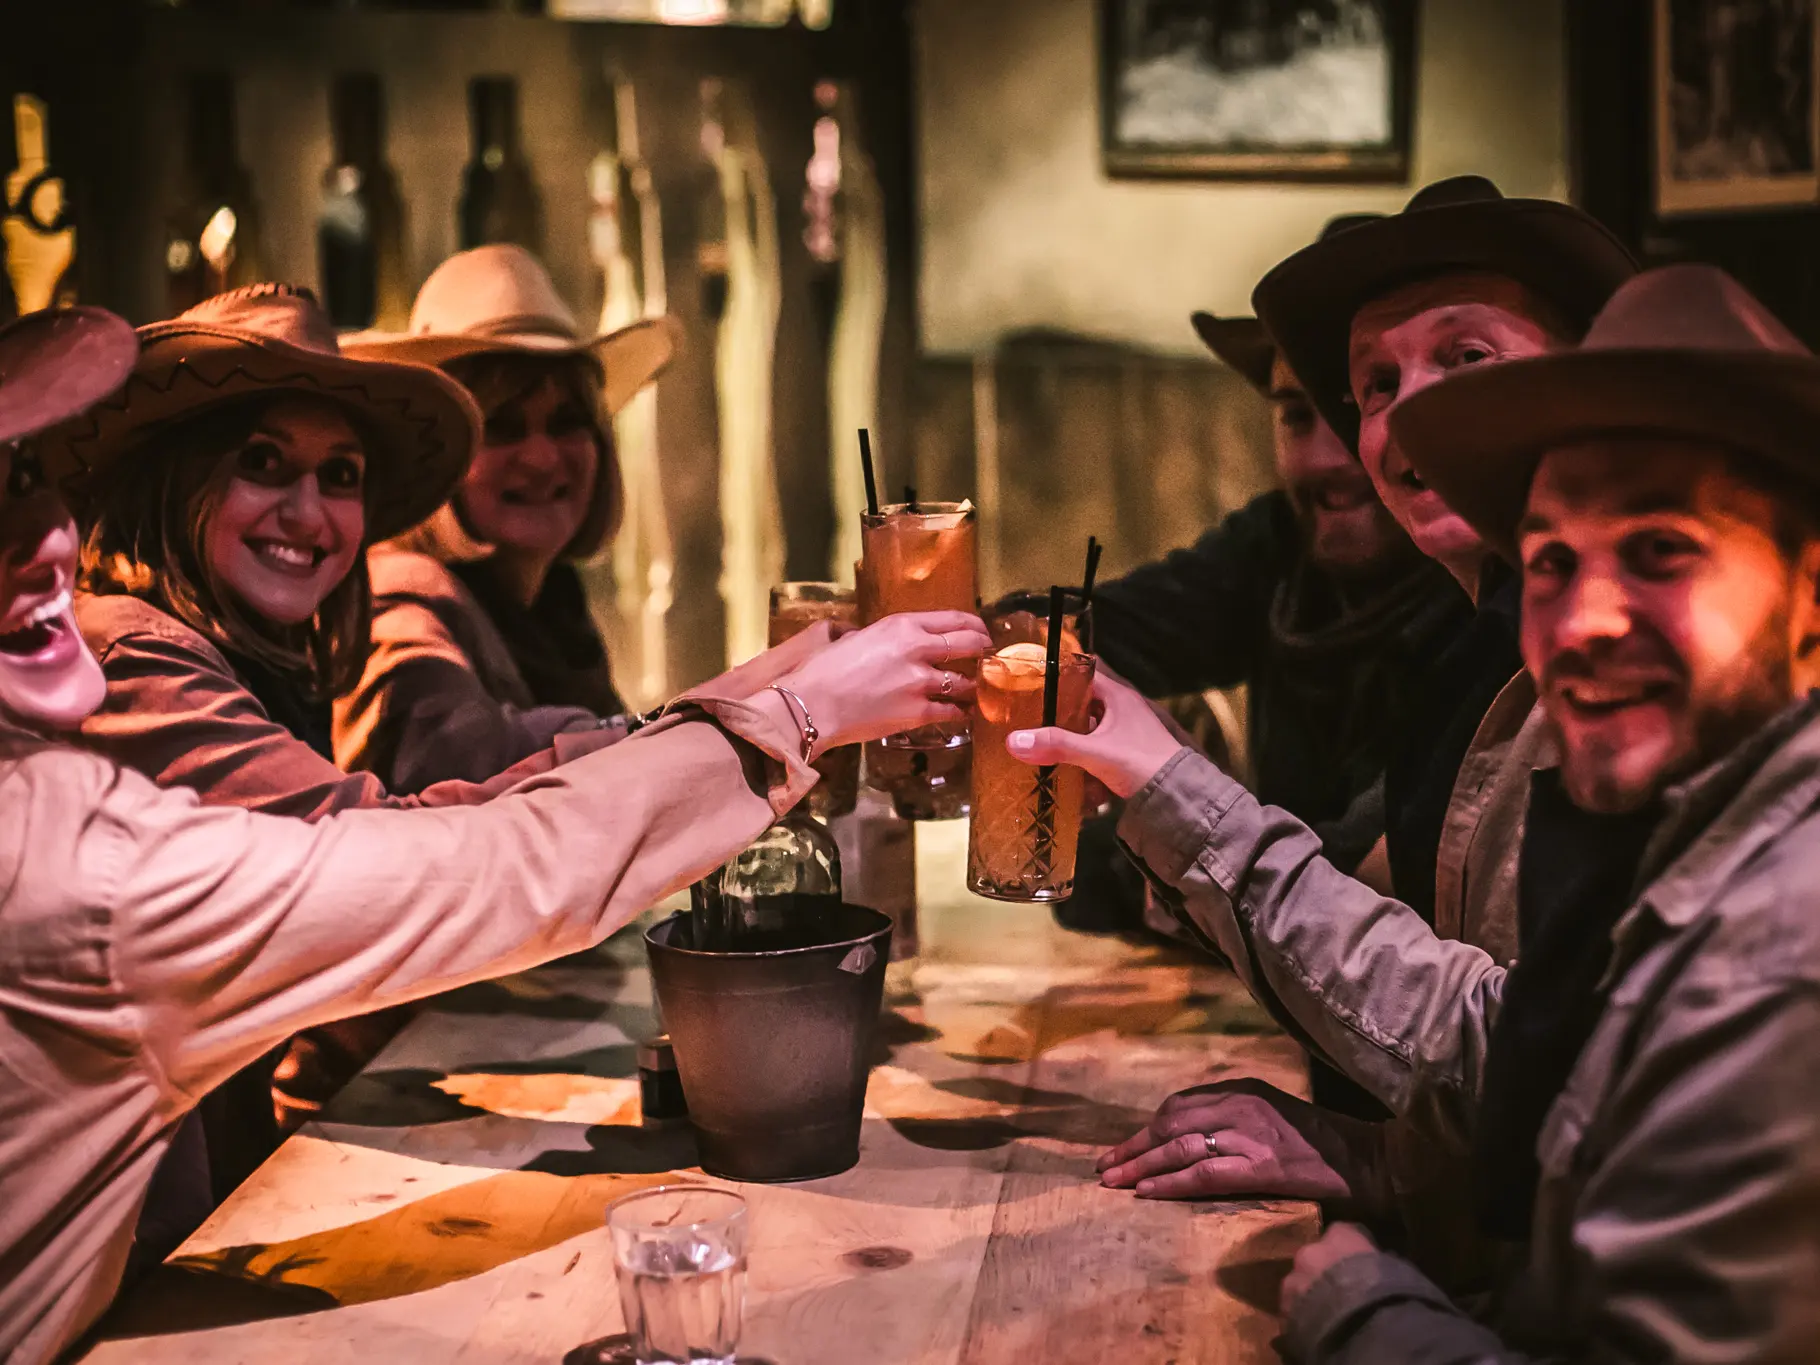 A group wearing cowboy hats sit at a card table covered in drinks